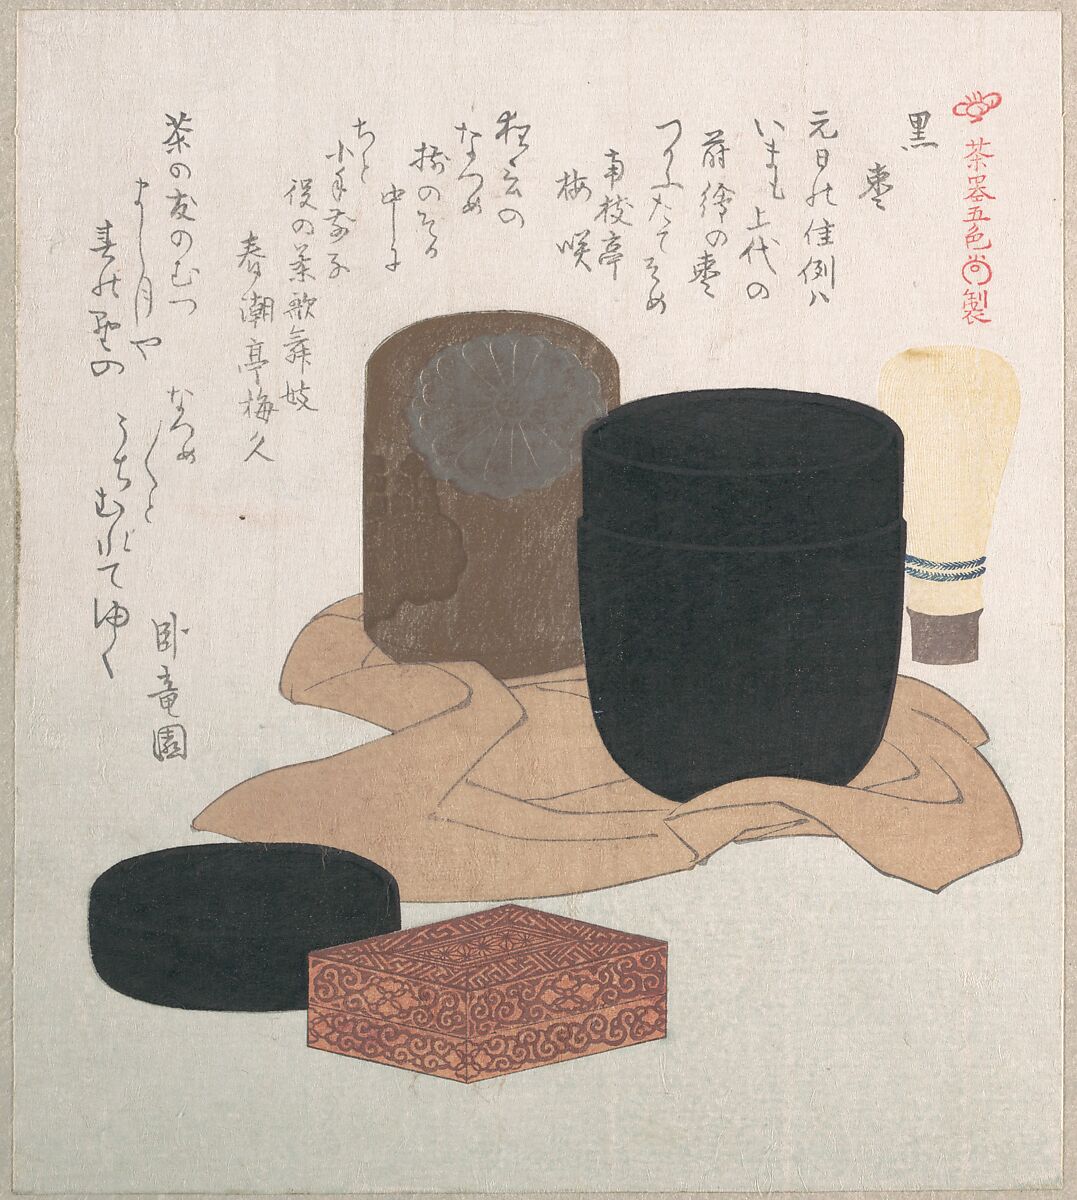 Black, Kubo Shunman (Japanese, 1757–1820), Part of an album of woodblock prints (surimono); ink and color on paper, Japan 